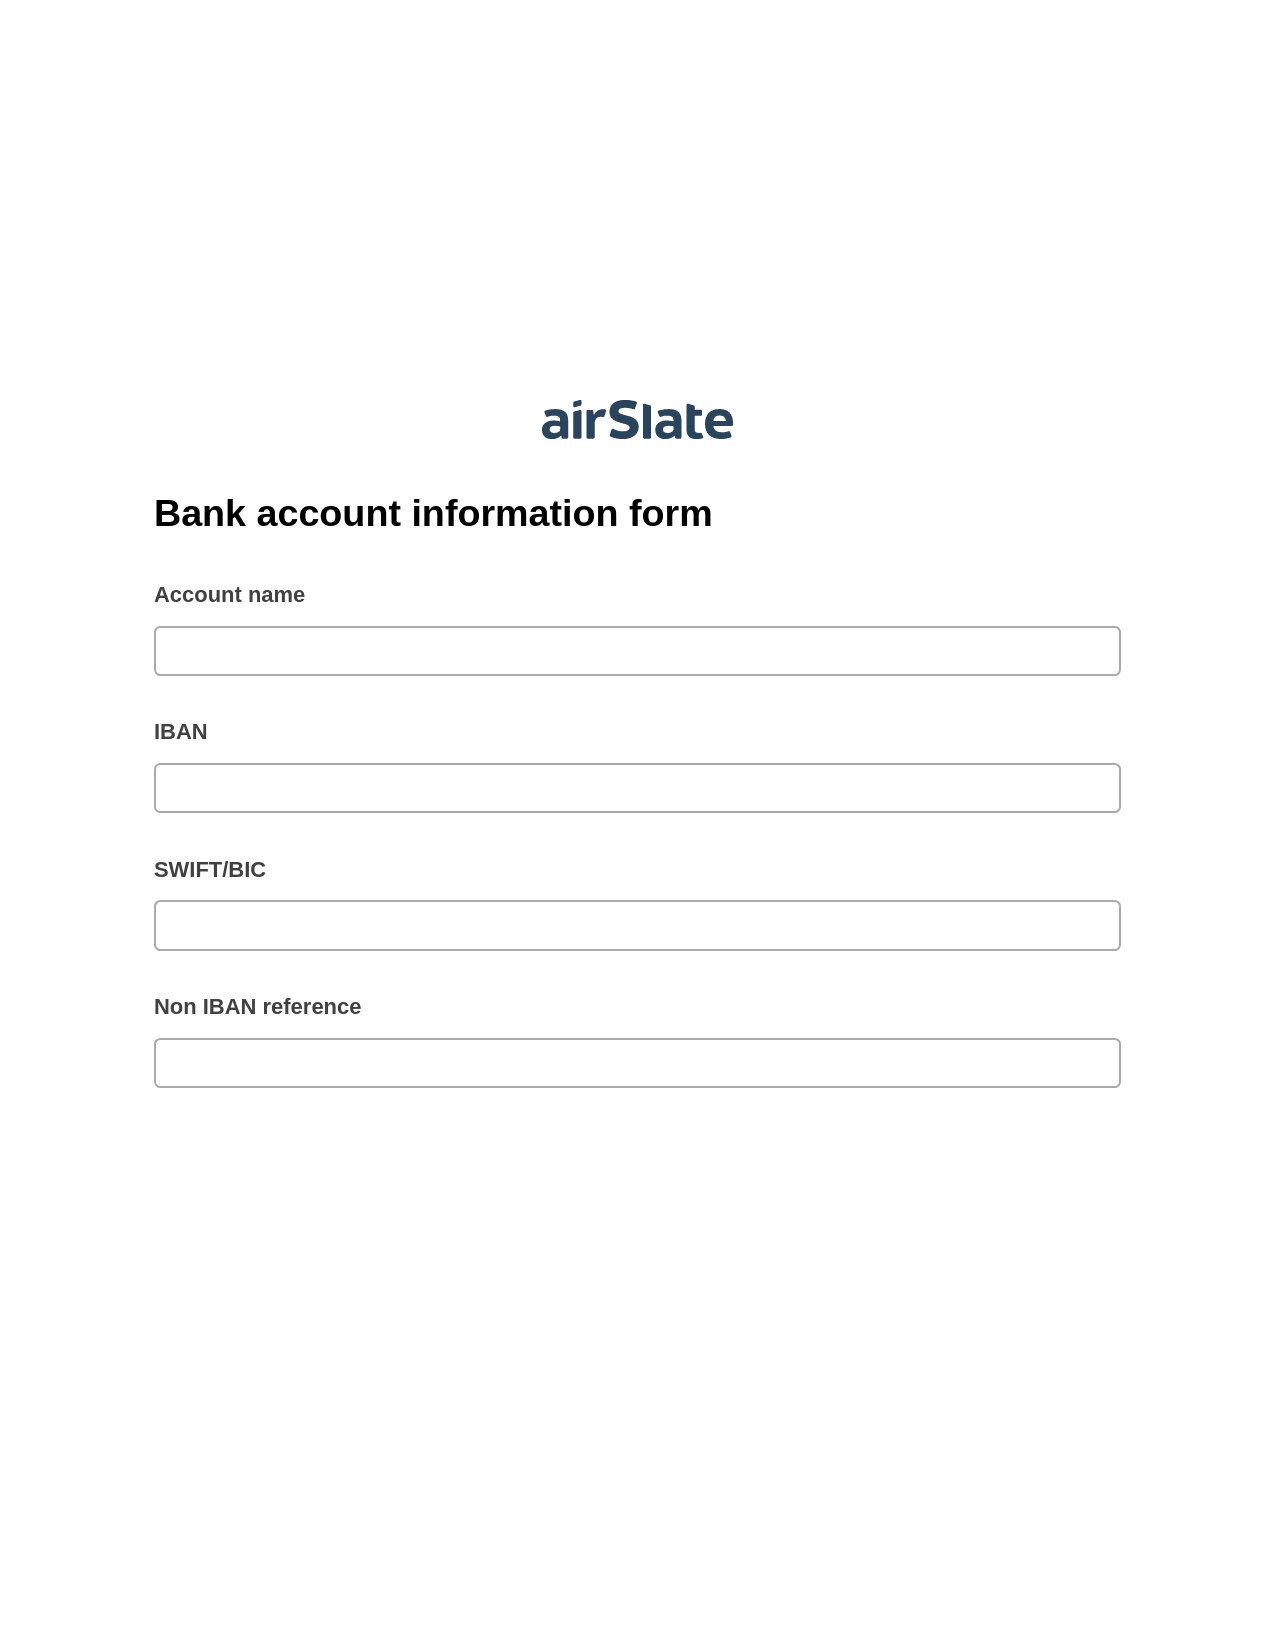 Bank account information form Pre-fill from CSV File Bot, Mailchimp send Campaign bot, Export to Salesforce Bot